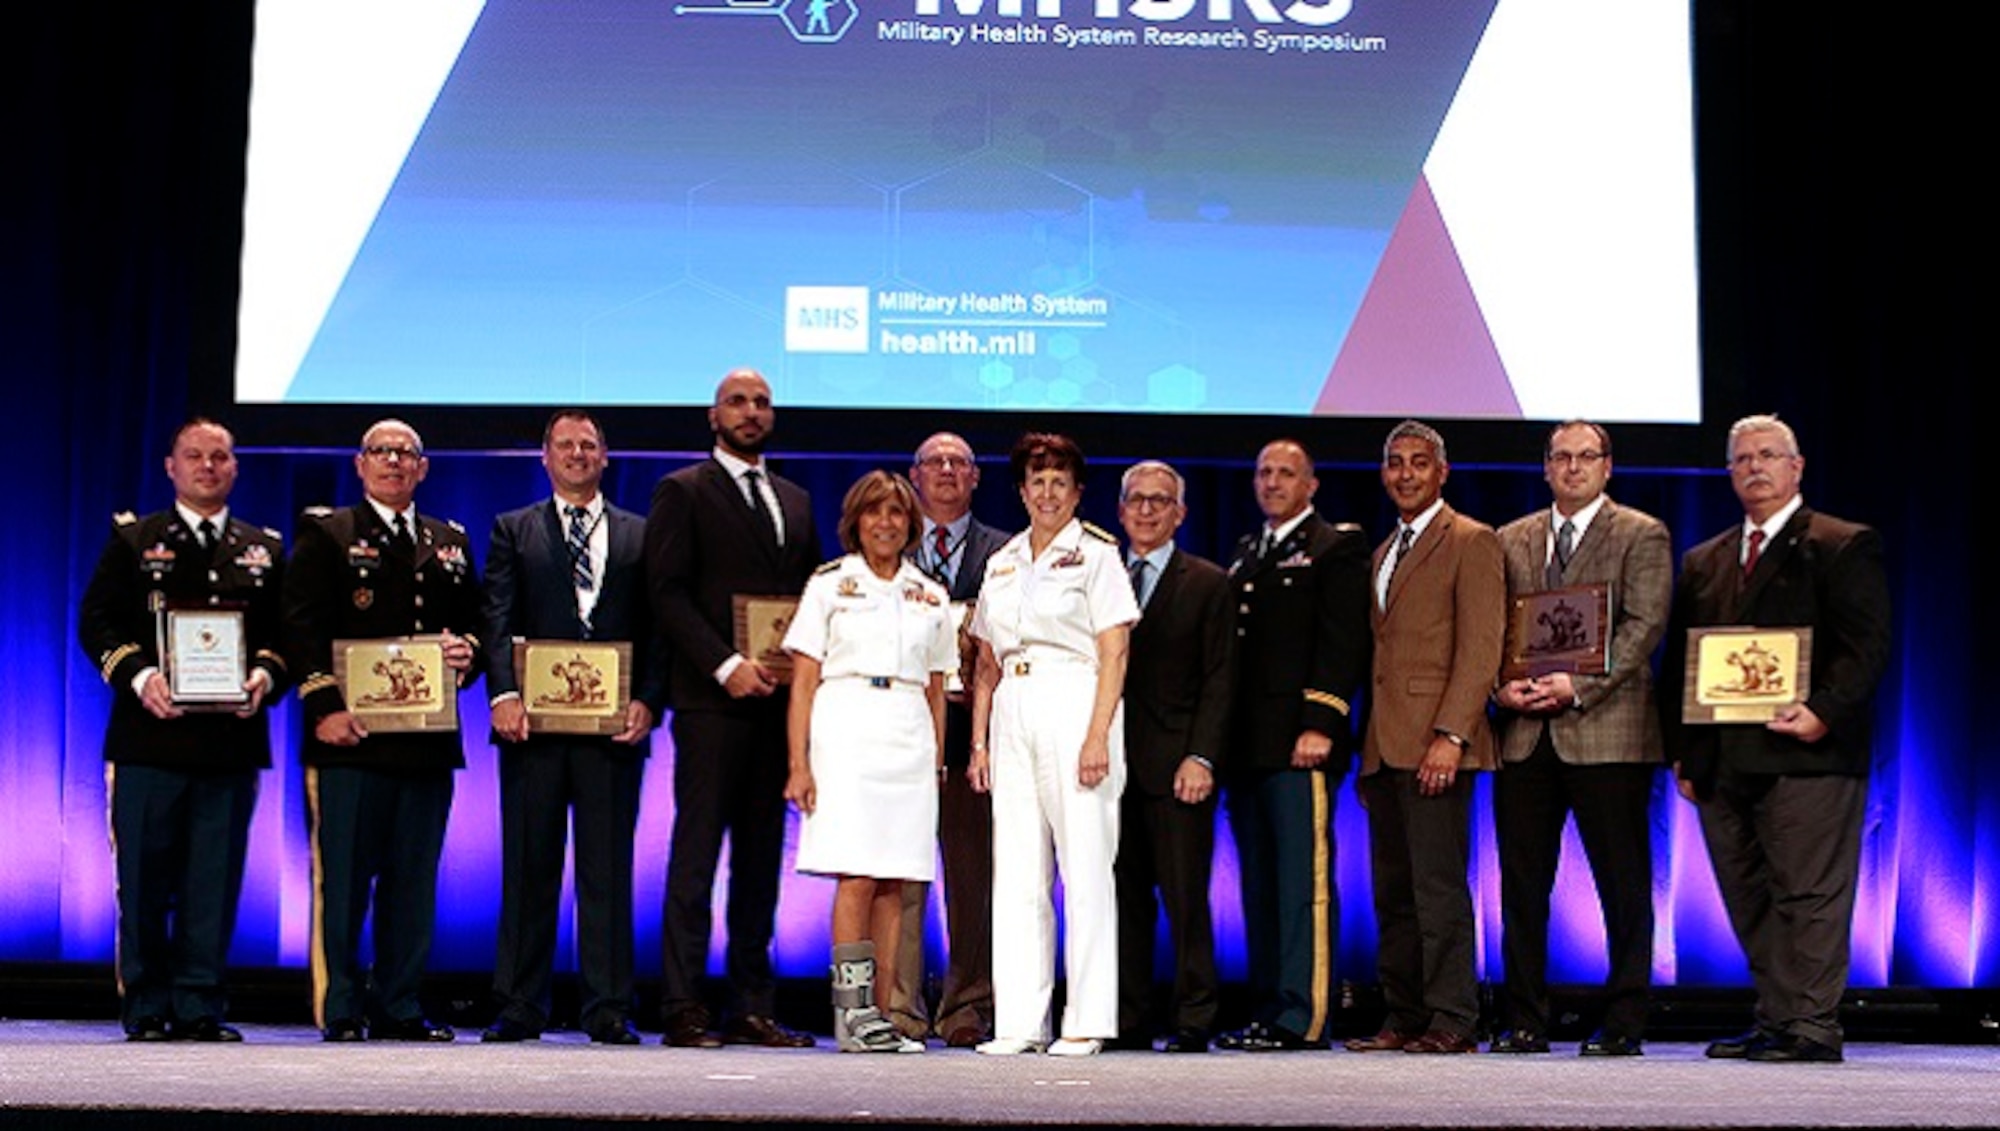 Navy Vice Adm. Raquel C. Bono and Navy Rear Adm. Mary C. Riggs join individual and team award winners honored at the 2019 Military Health System Research Symposium on Monday, August 19th in Kissimmee, Florida. (MHS photo)